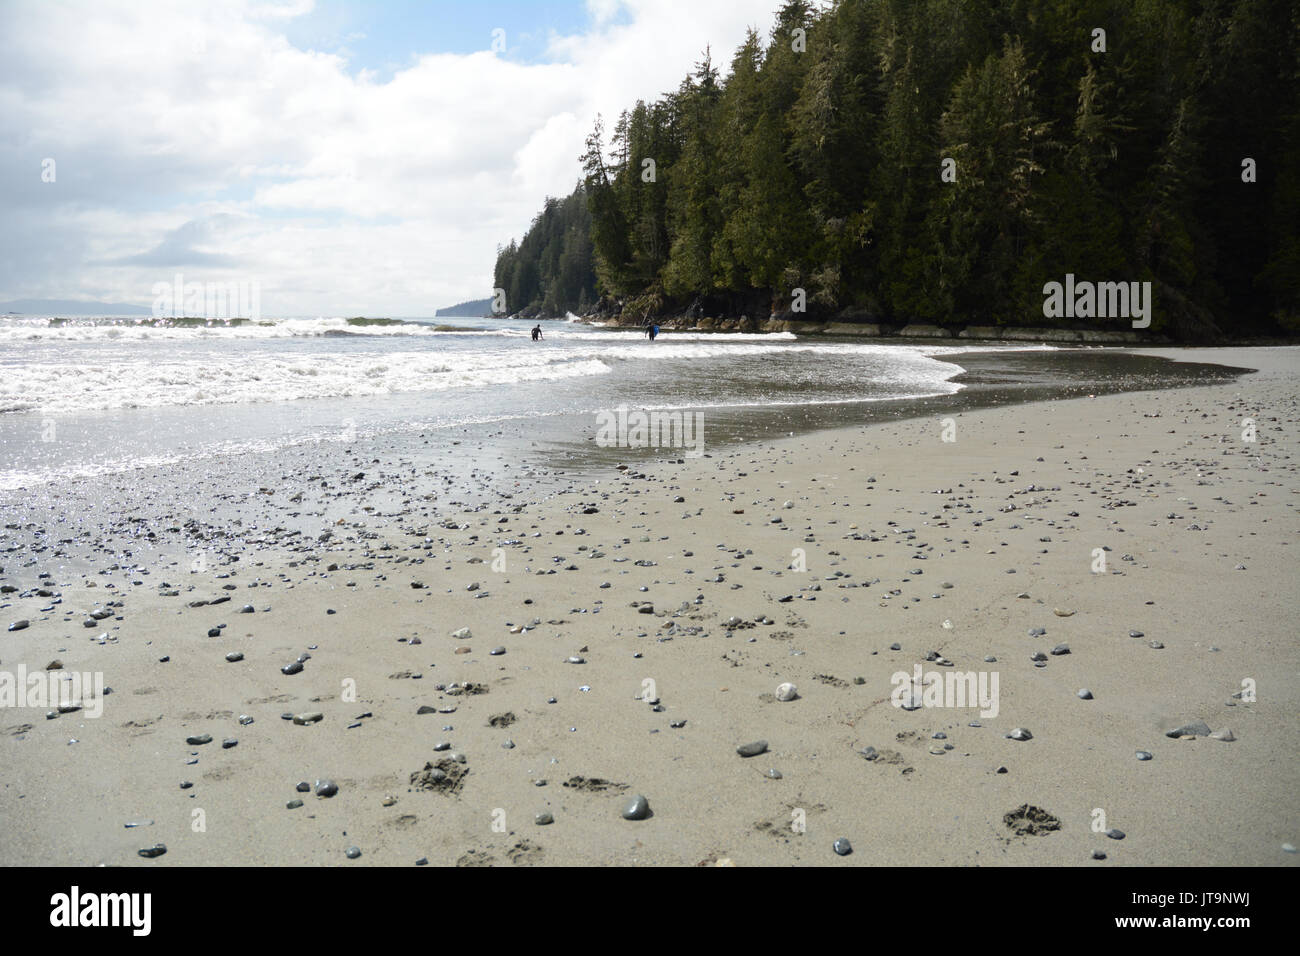 A pair of surfers on Pacheedaht Beach, on a native reserve of the same name, near Port Renfrew, Vancouver Island, British Columbia, Canada. Stock Photo